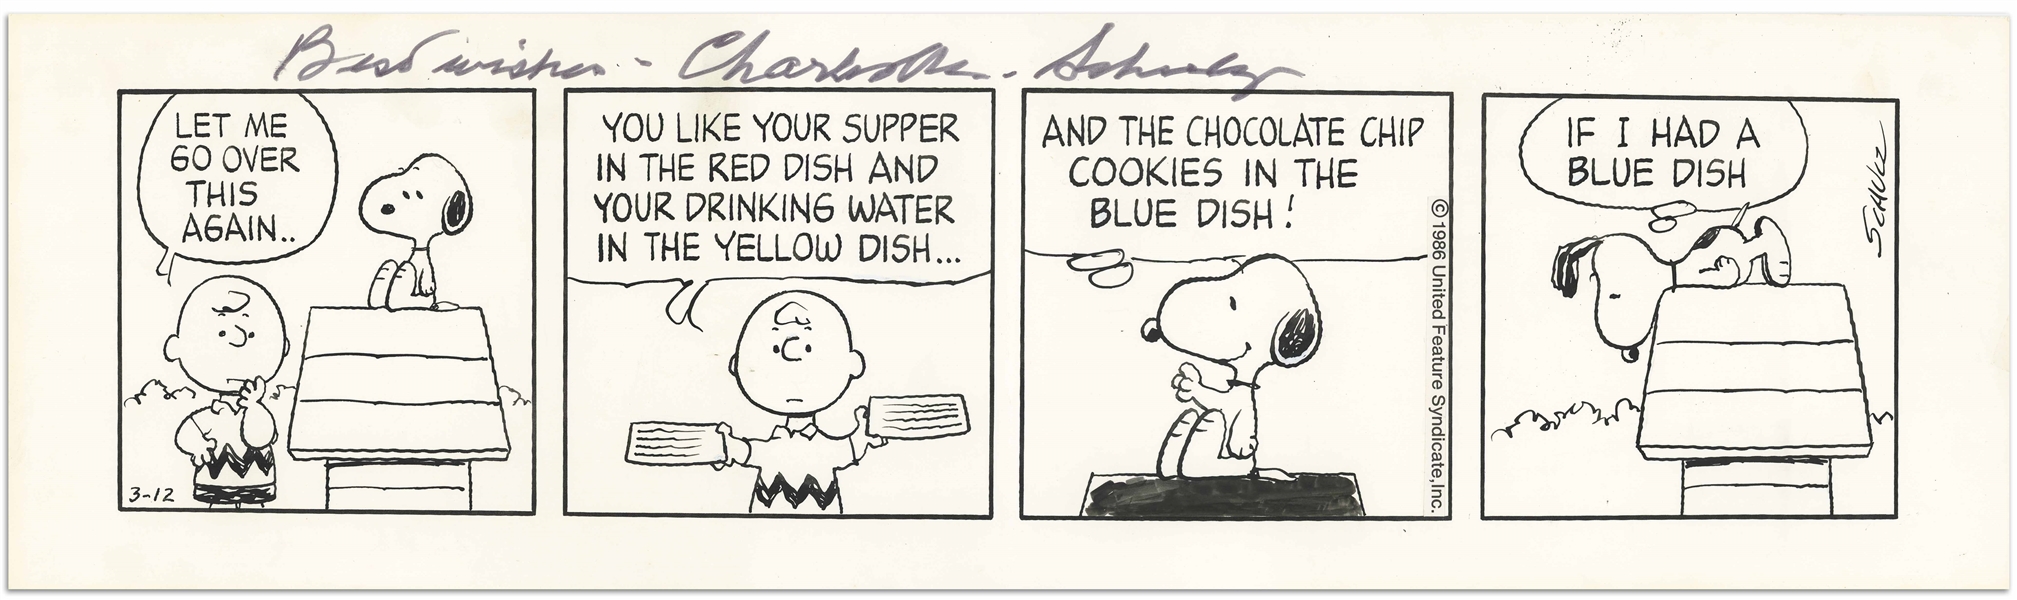 Charles Schulz Hand-Drawn ''Peanuts'' Comic Strip From 1986 -- Charlie Brown & Snoopy Negotiate His Treats